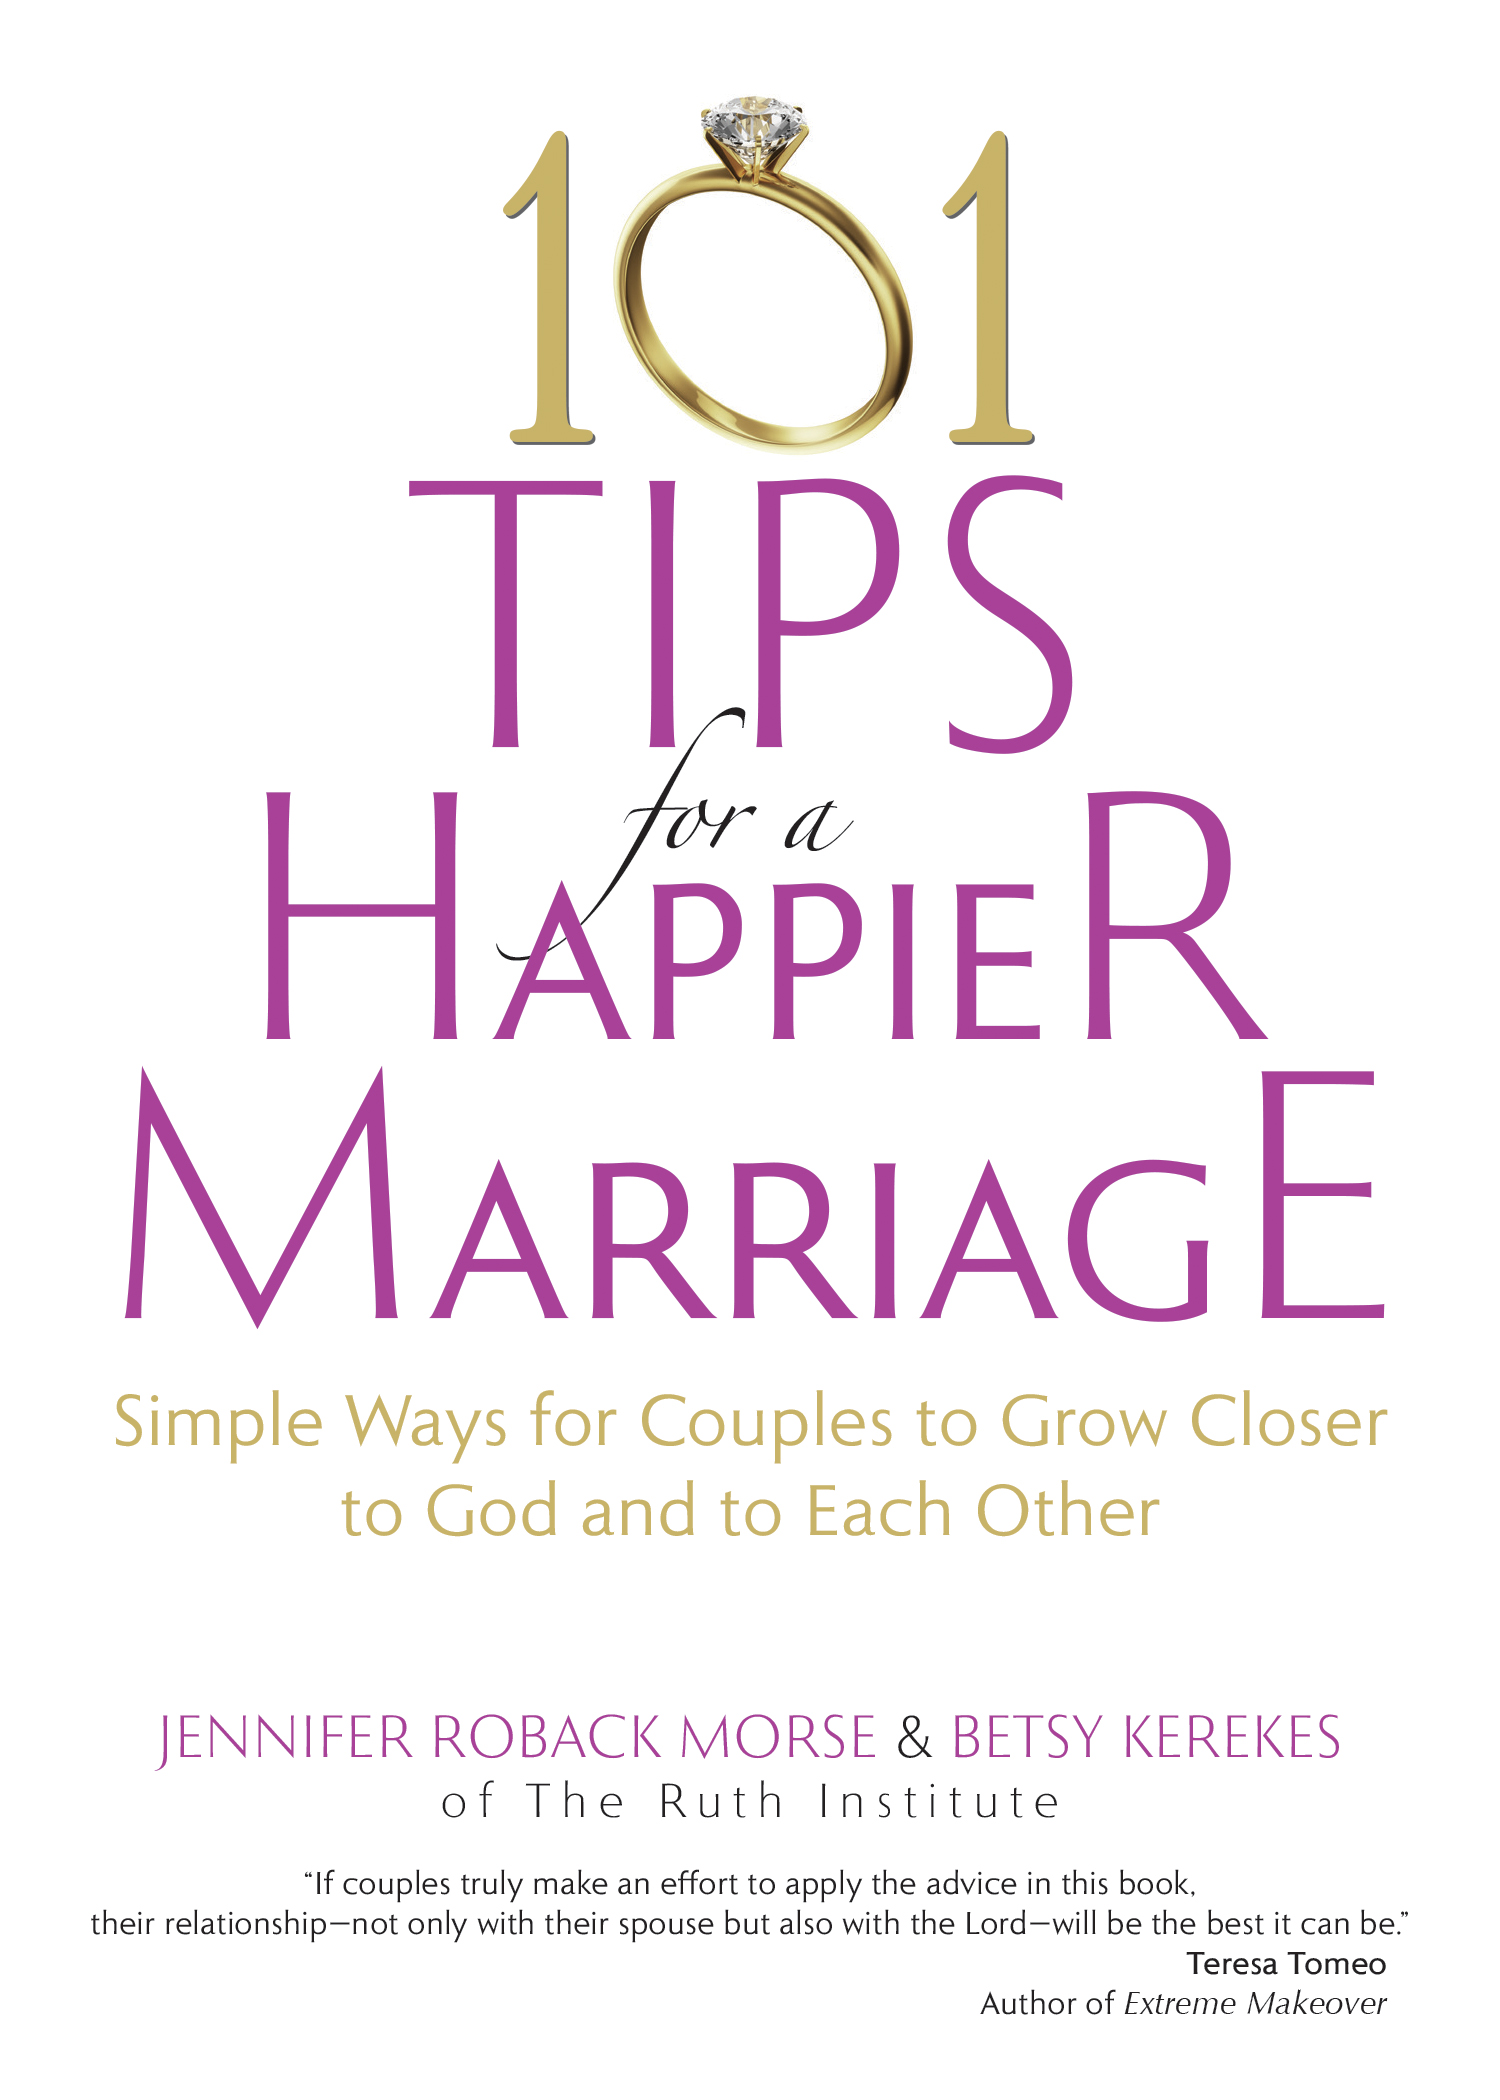 101 Tips for a Happier Marriage